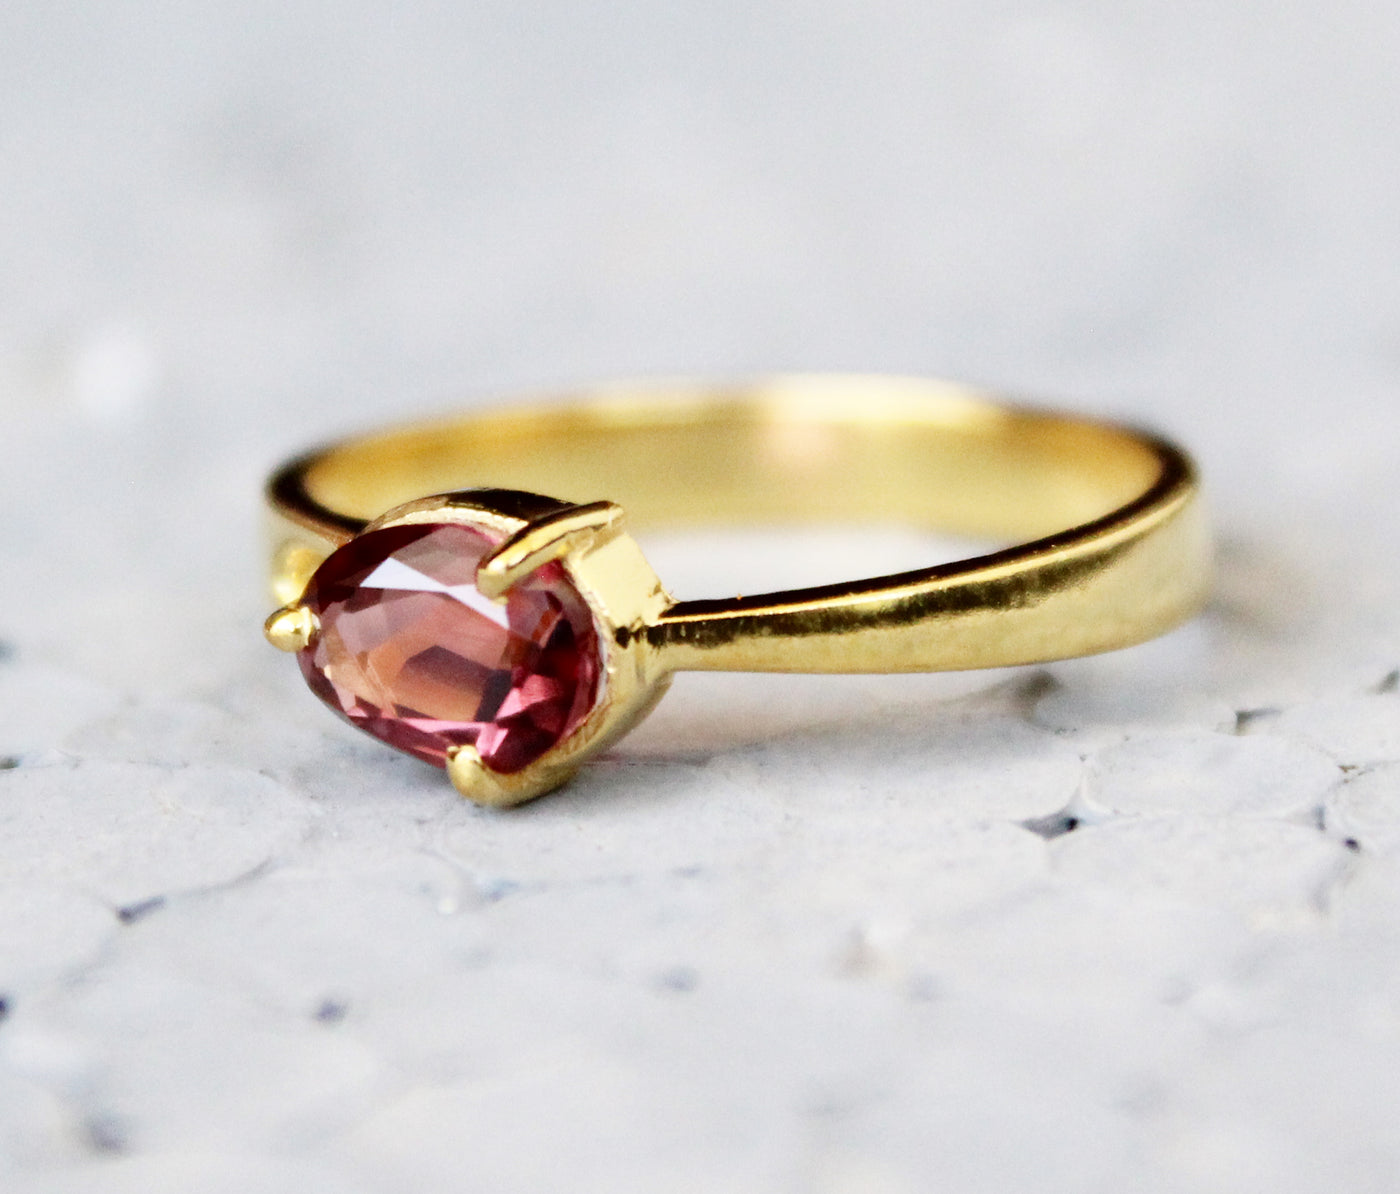 Natural Spinel Ring, August Birthstone, Stacking Rings, Cocktail Ring, Pink Spinel Ring, Gold Filled Rings